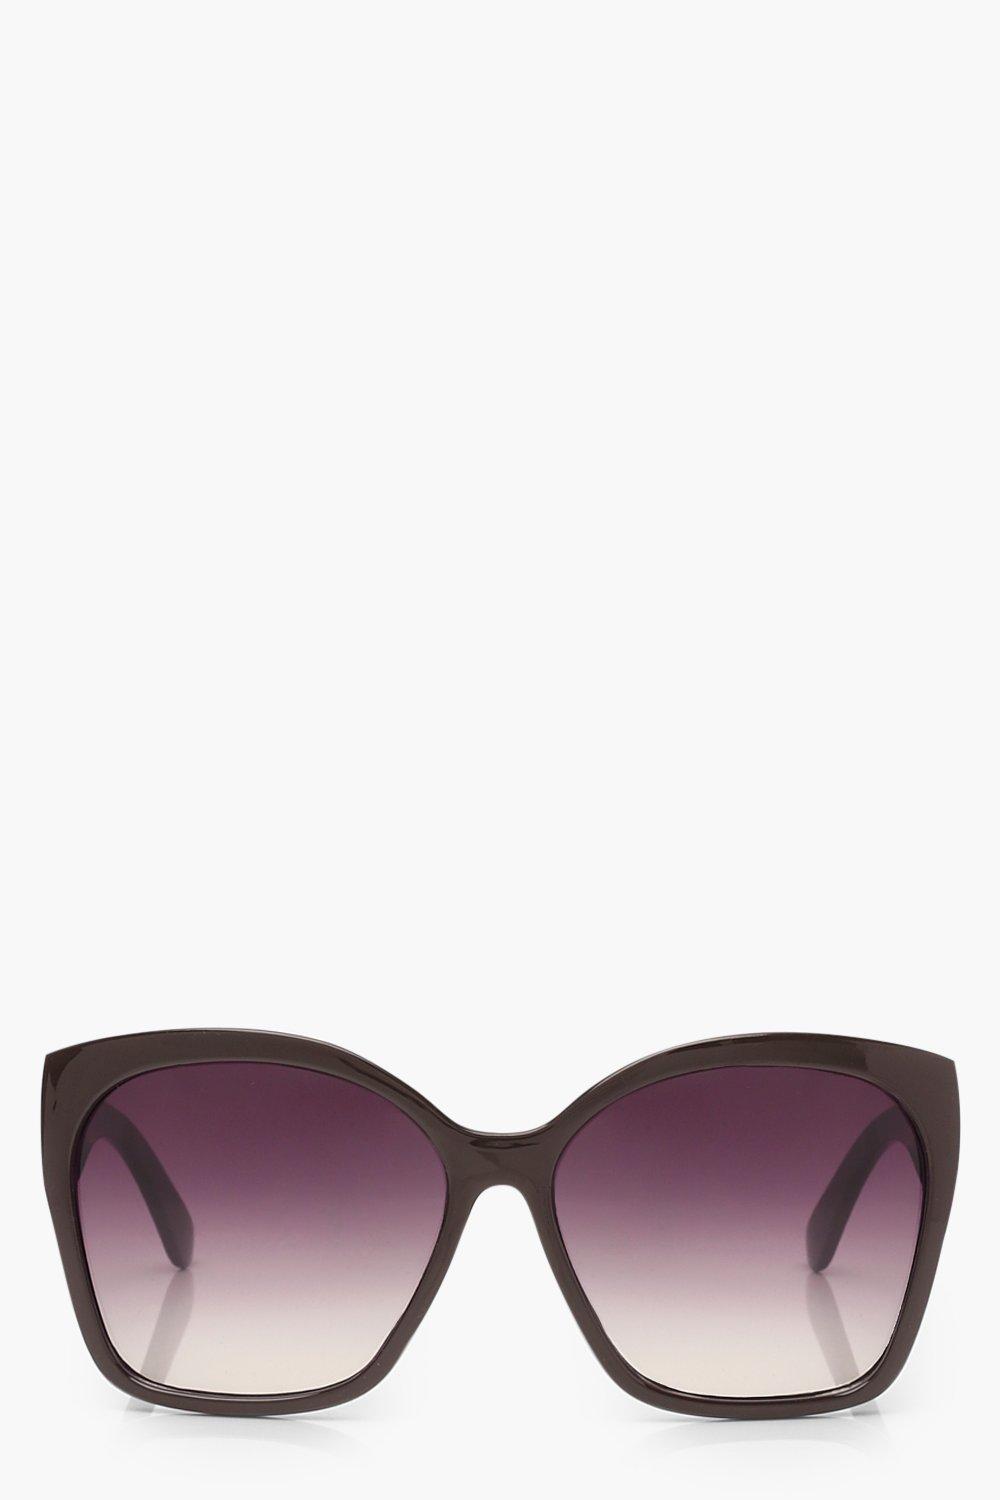 Boohoo Oversized Classic Sunglasses- Brown  - Size: ONE SIZE